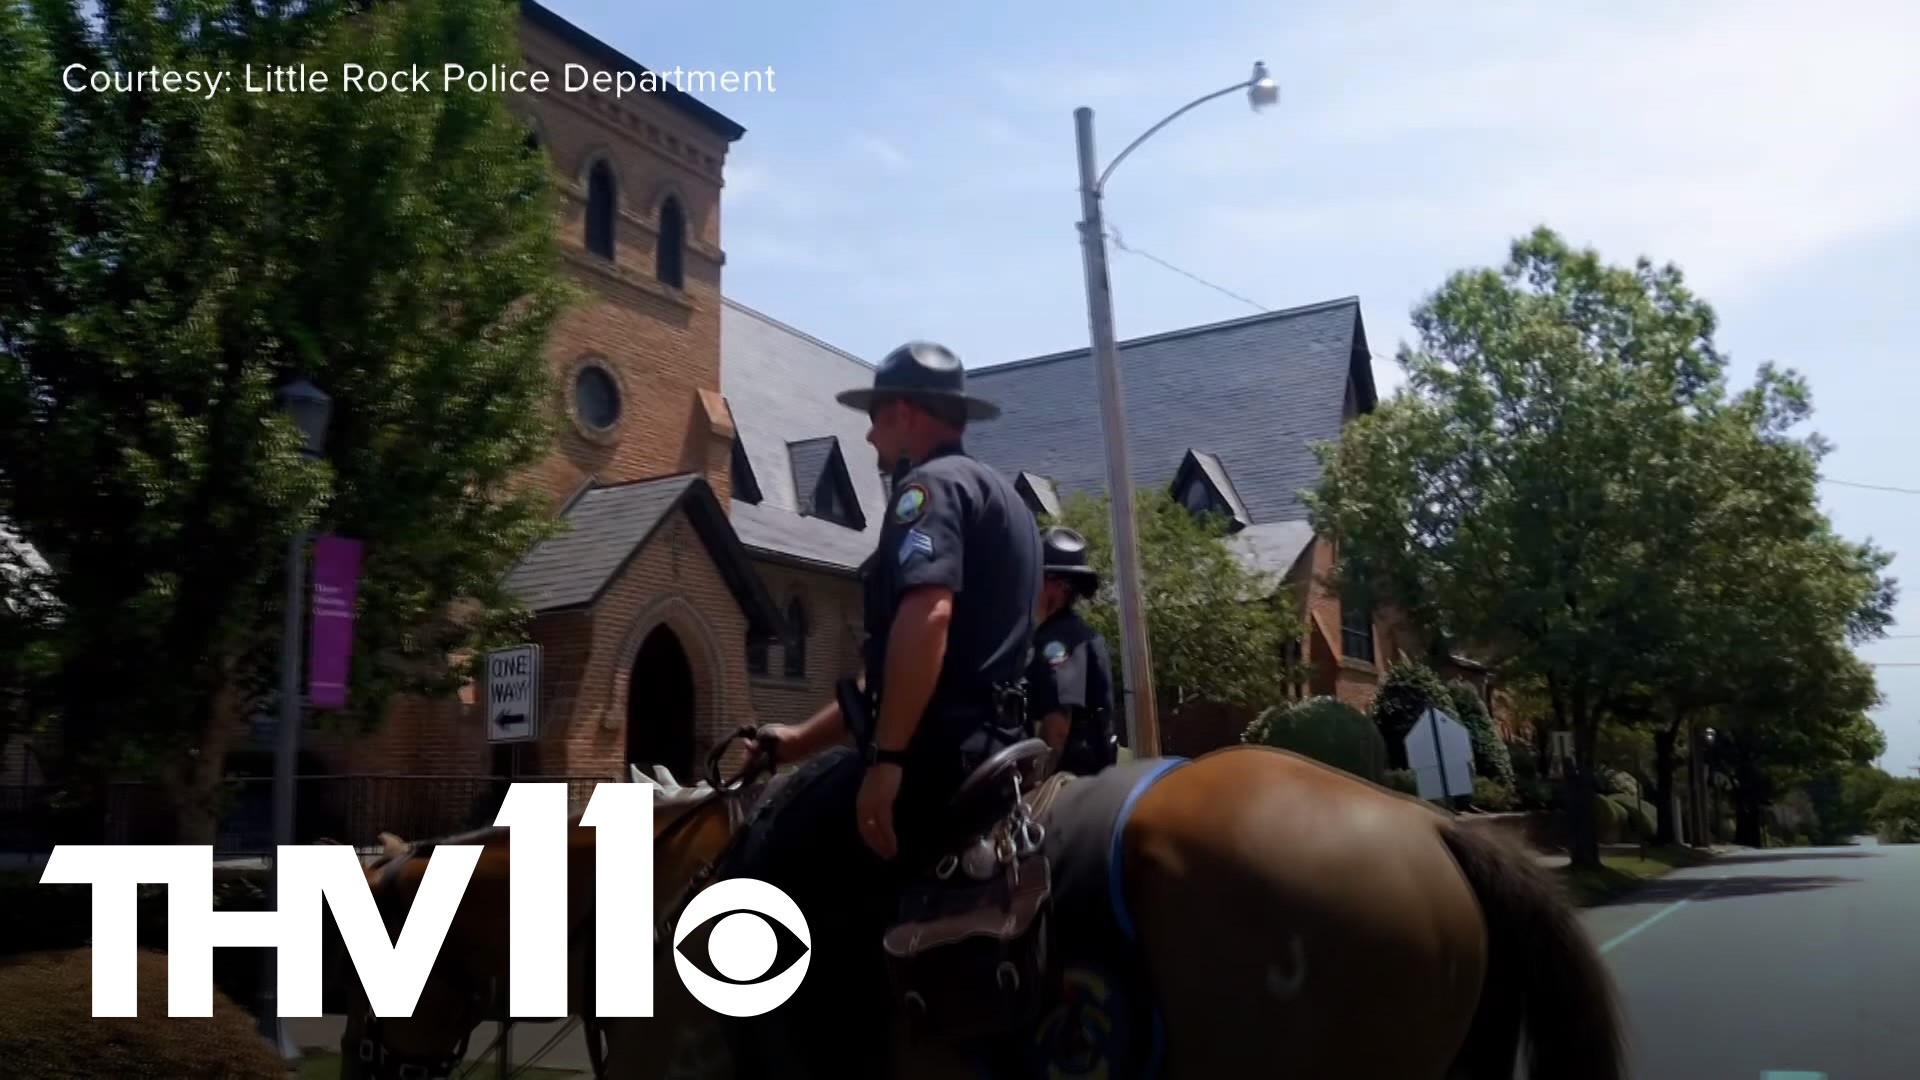 Around downtown, you may see police patrolling, including officers on horses. It's a part of the job that's not as familiar to the public.